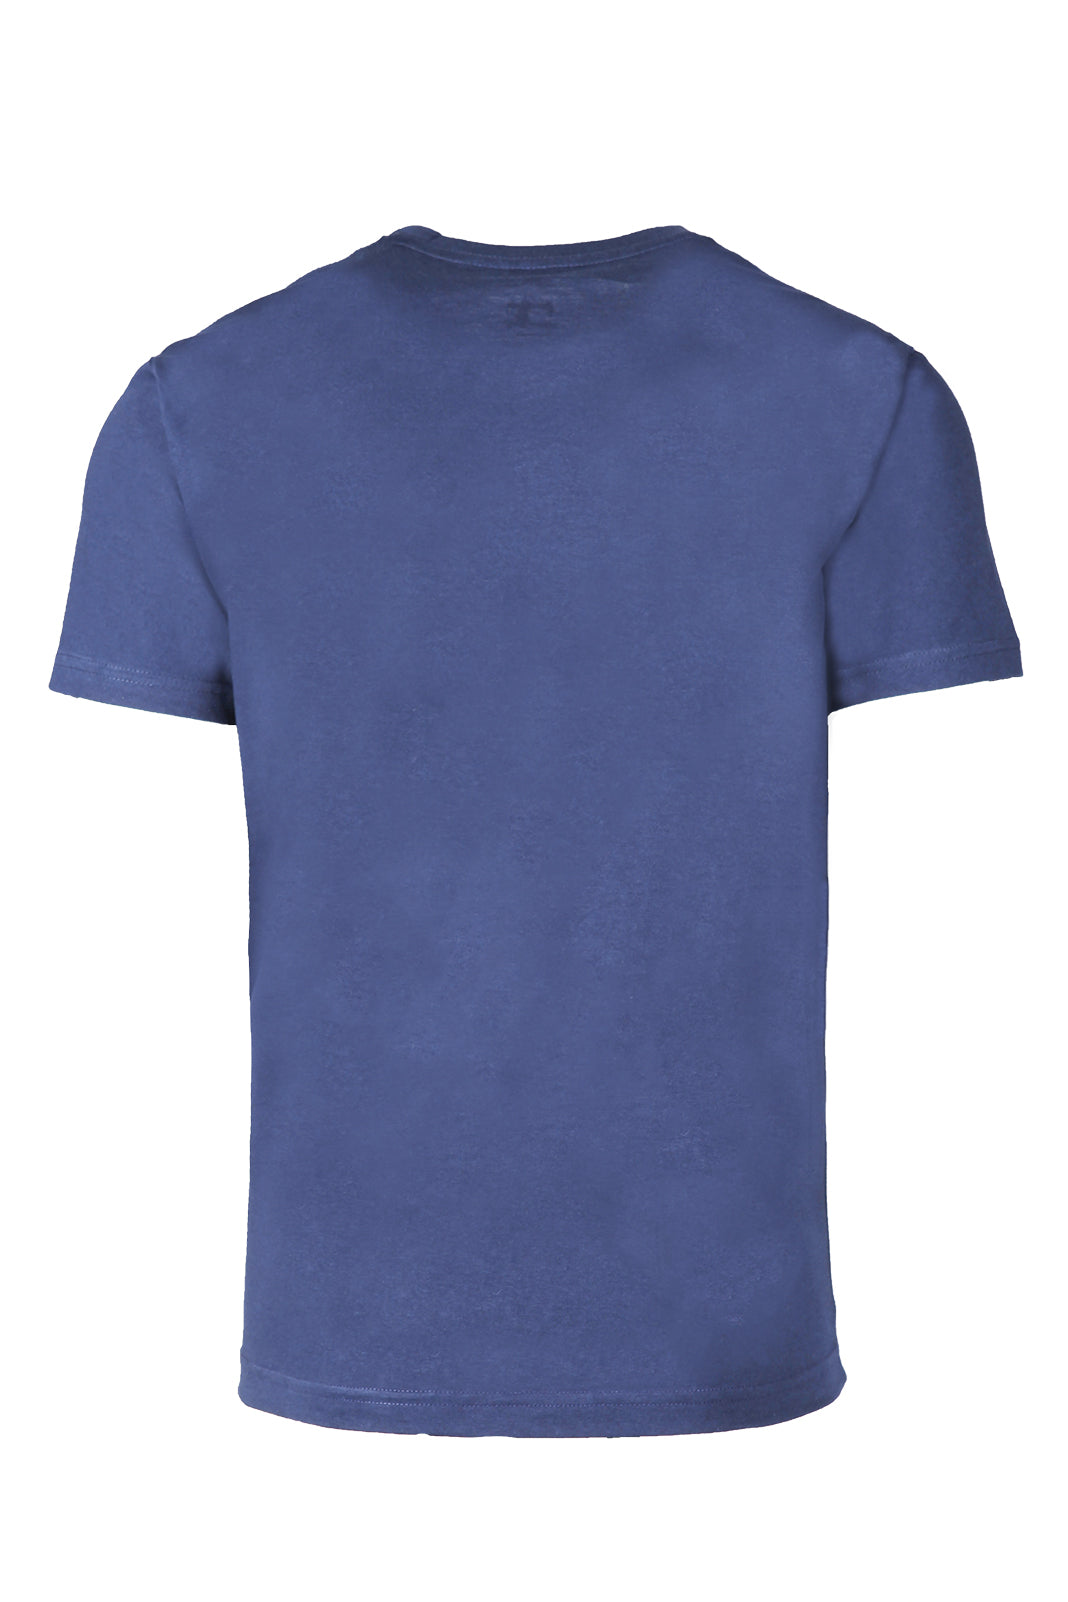 Andrew Smith T-Shirt Slim Fit Pria A0099X02D